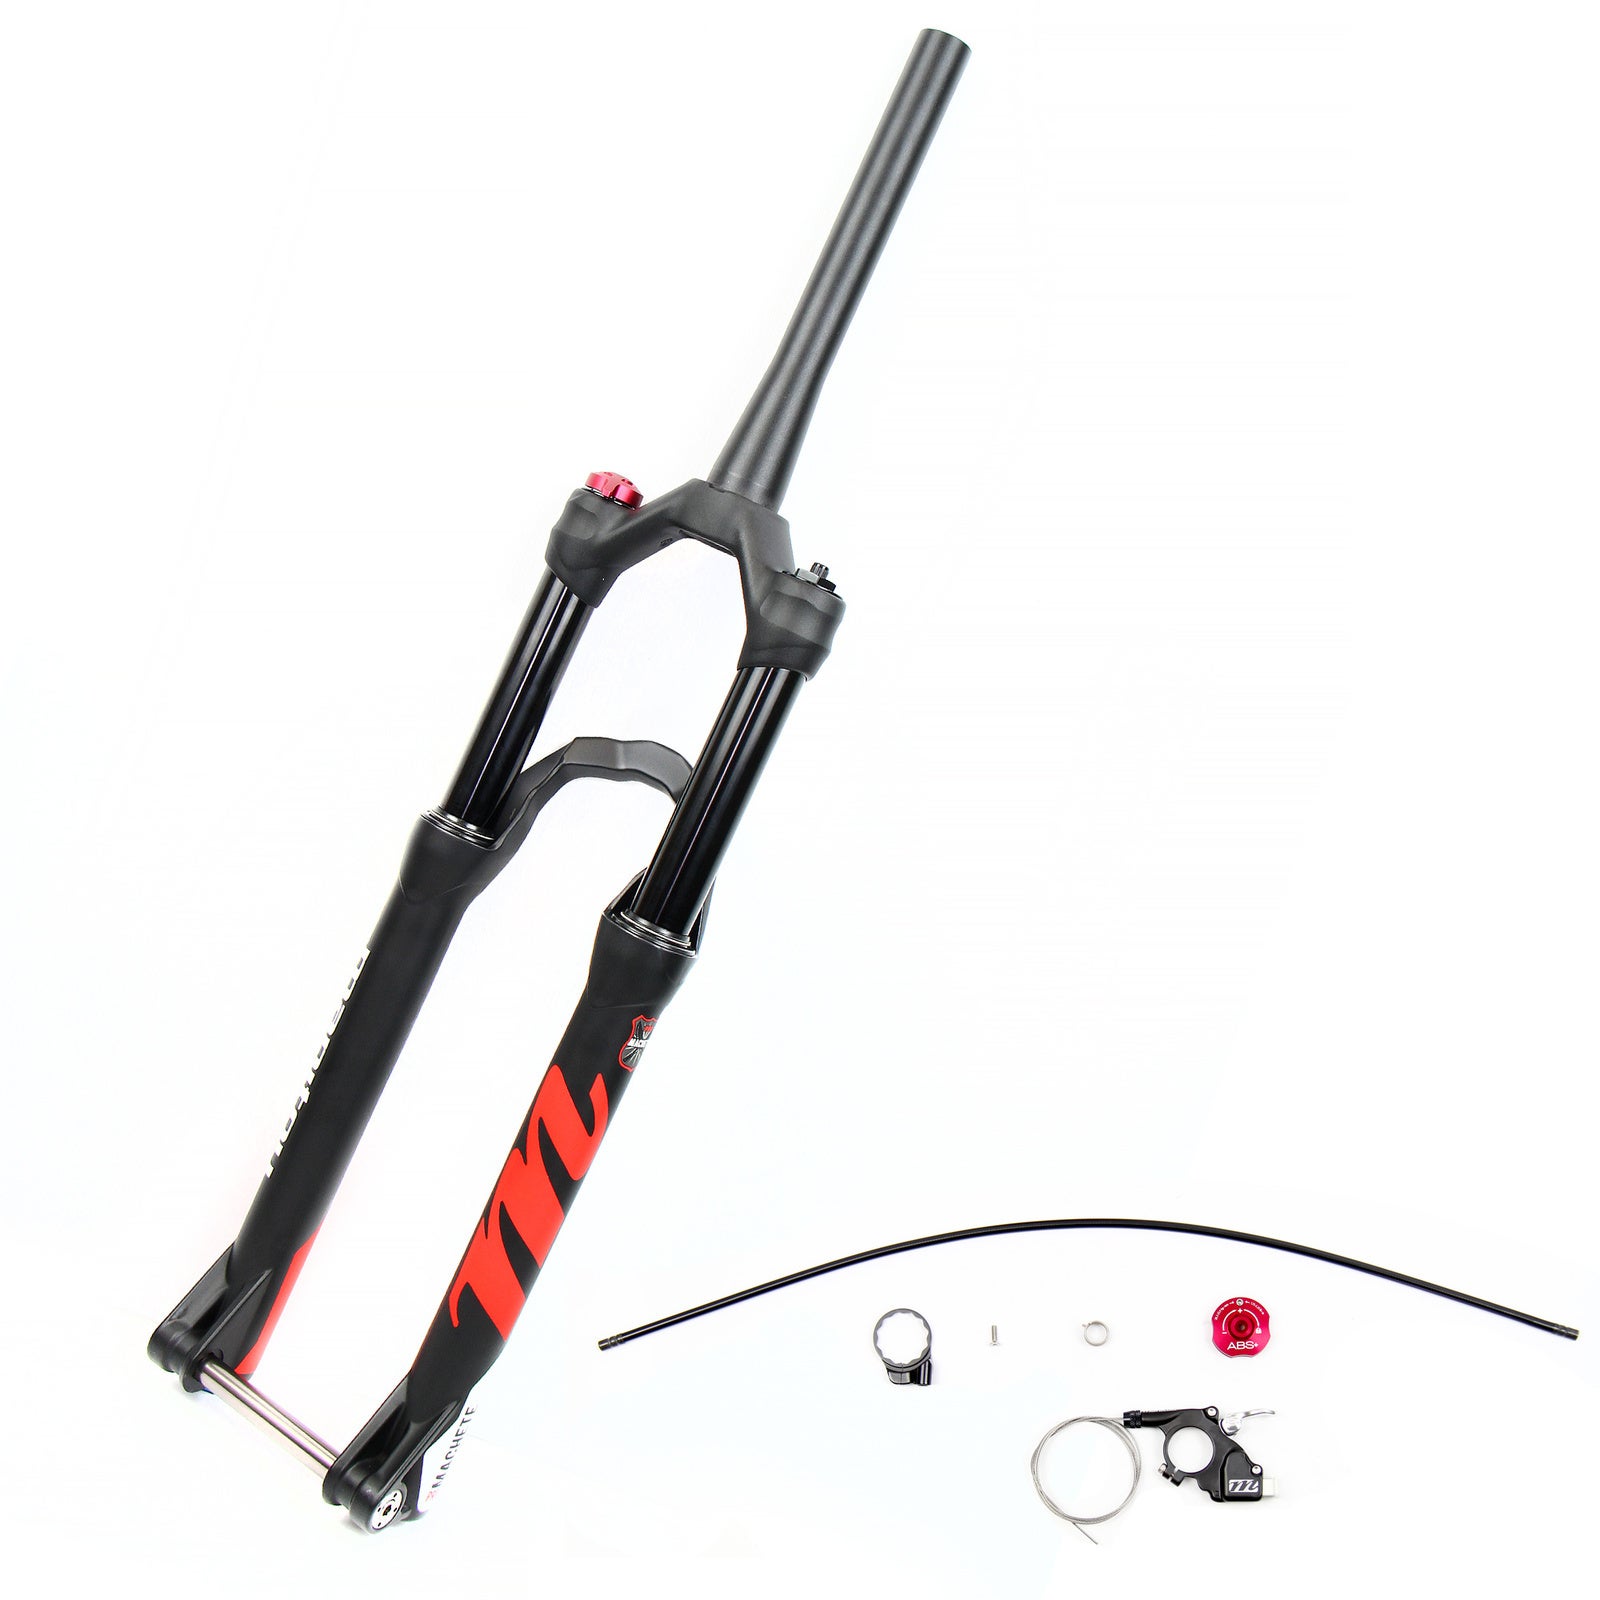 Manitou Machete Pro Mountain Bike Fork 27.5" 120mm Travel 15mm Axle Remote ABS Tapered